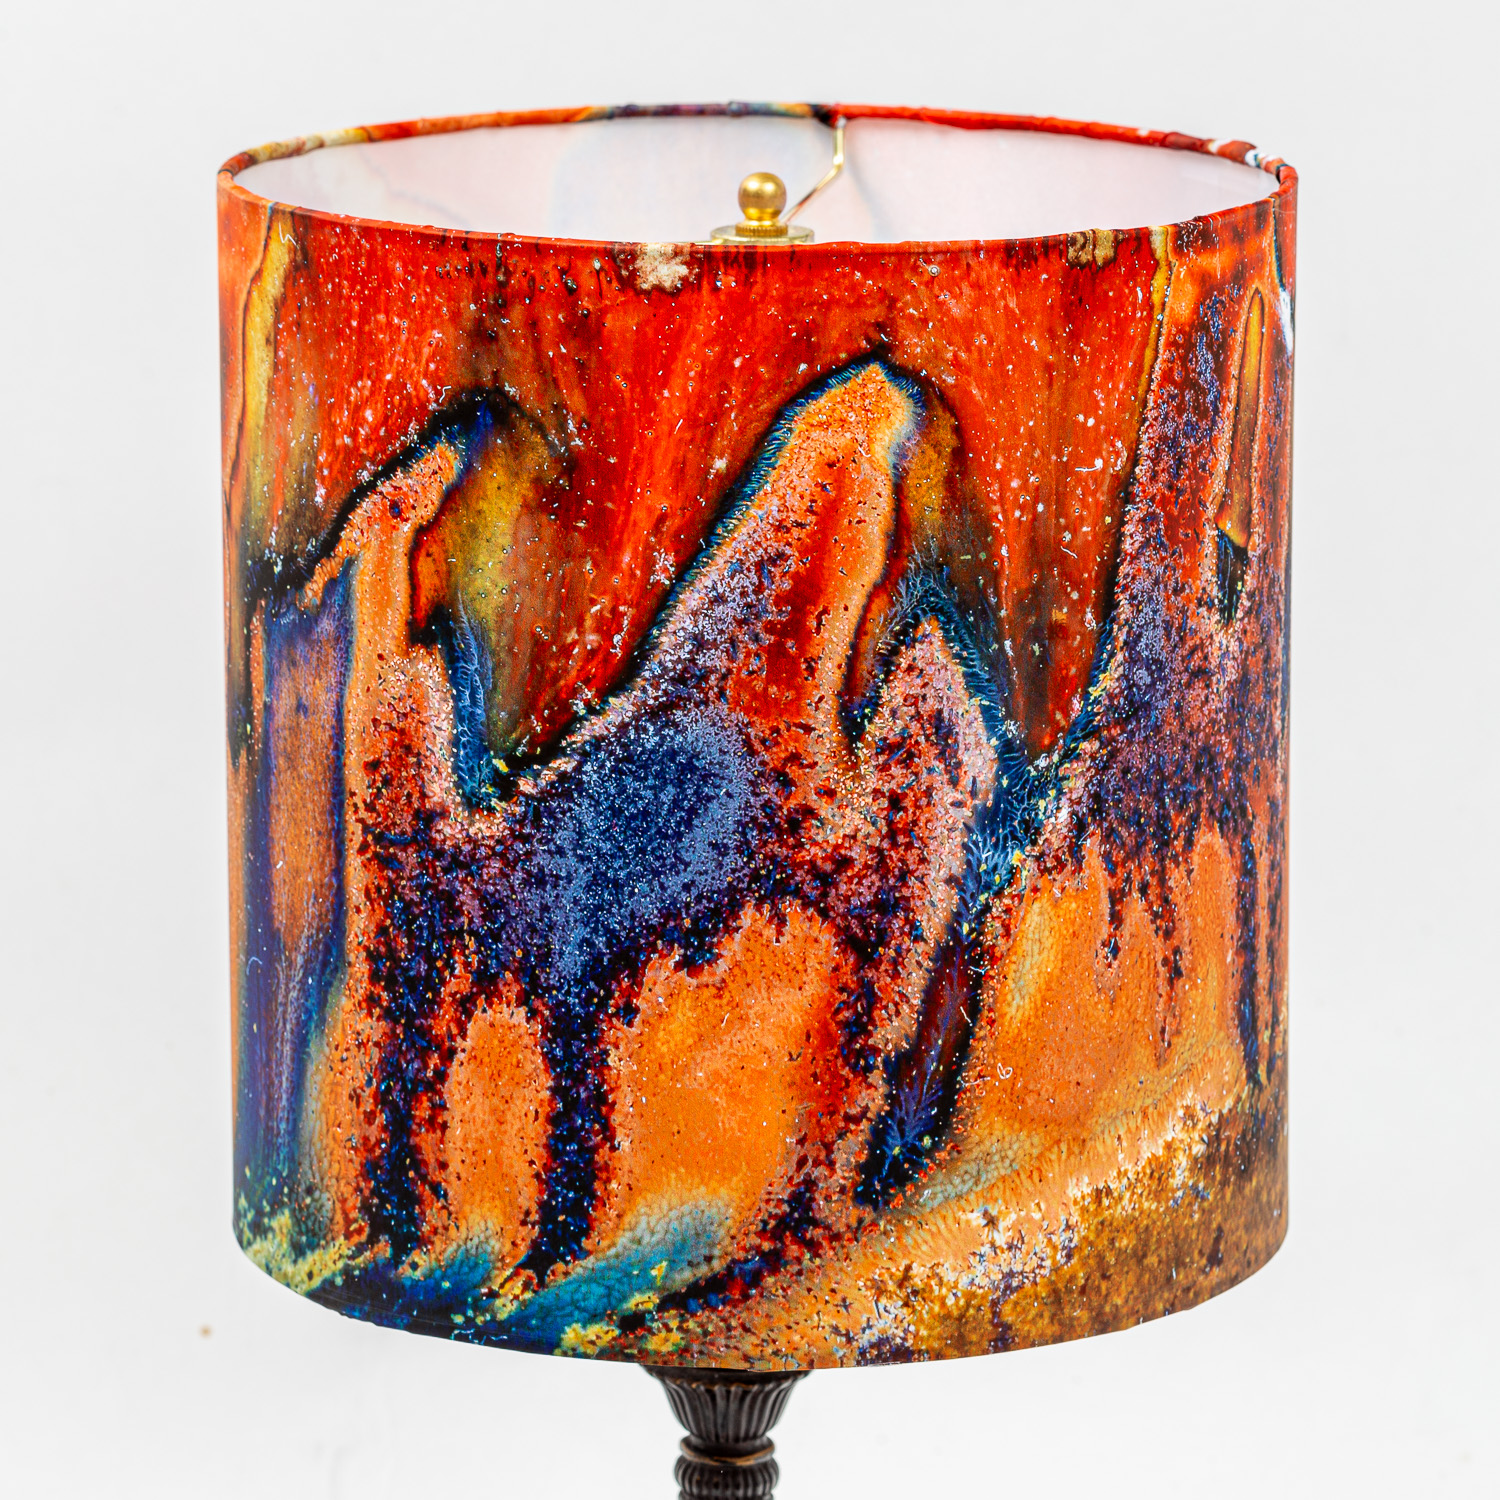 155: Closeup image of reduction-fired pottery by Scott Frankenberger  -- Photo on Lamp shade by David Elmore